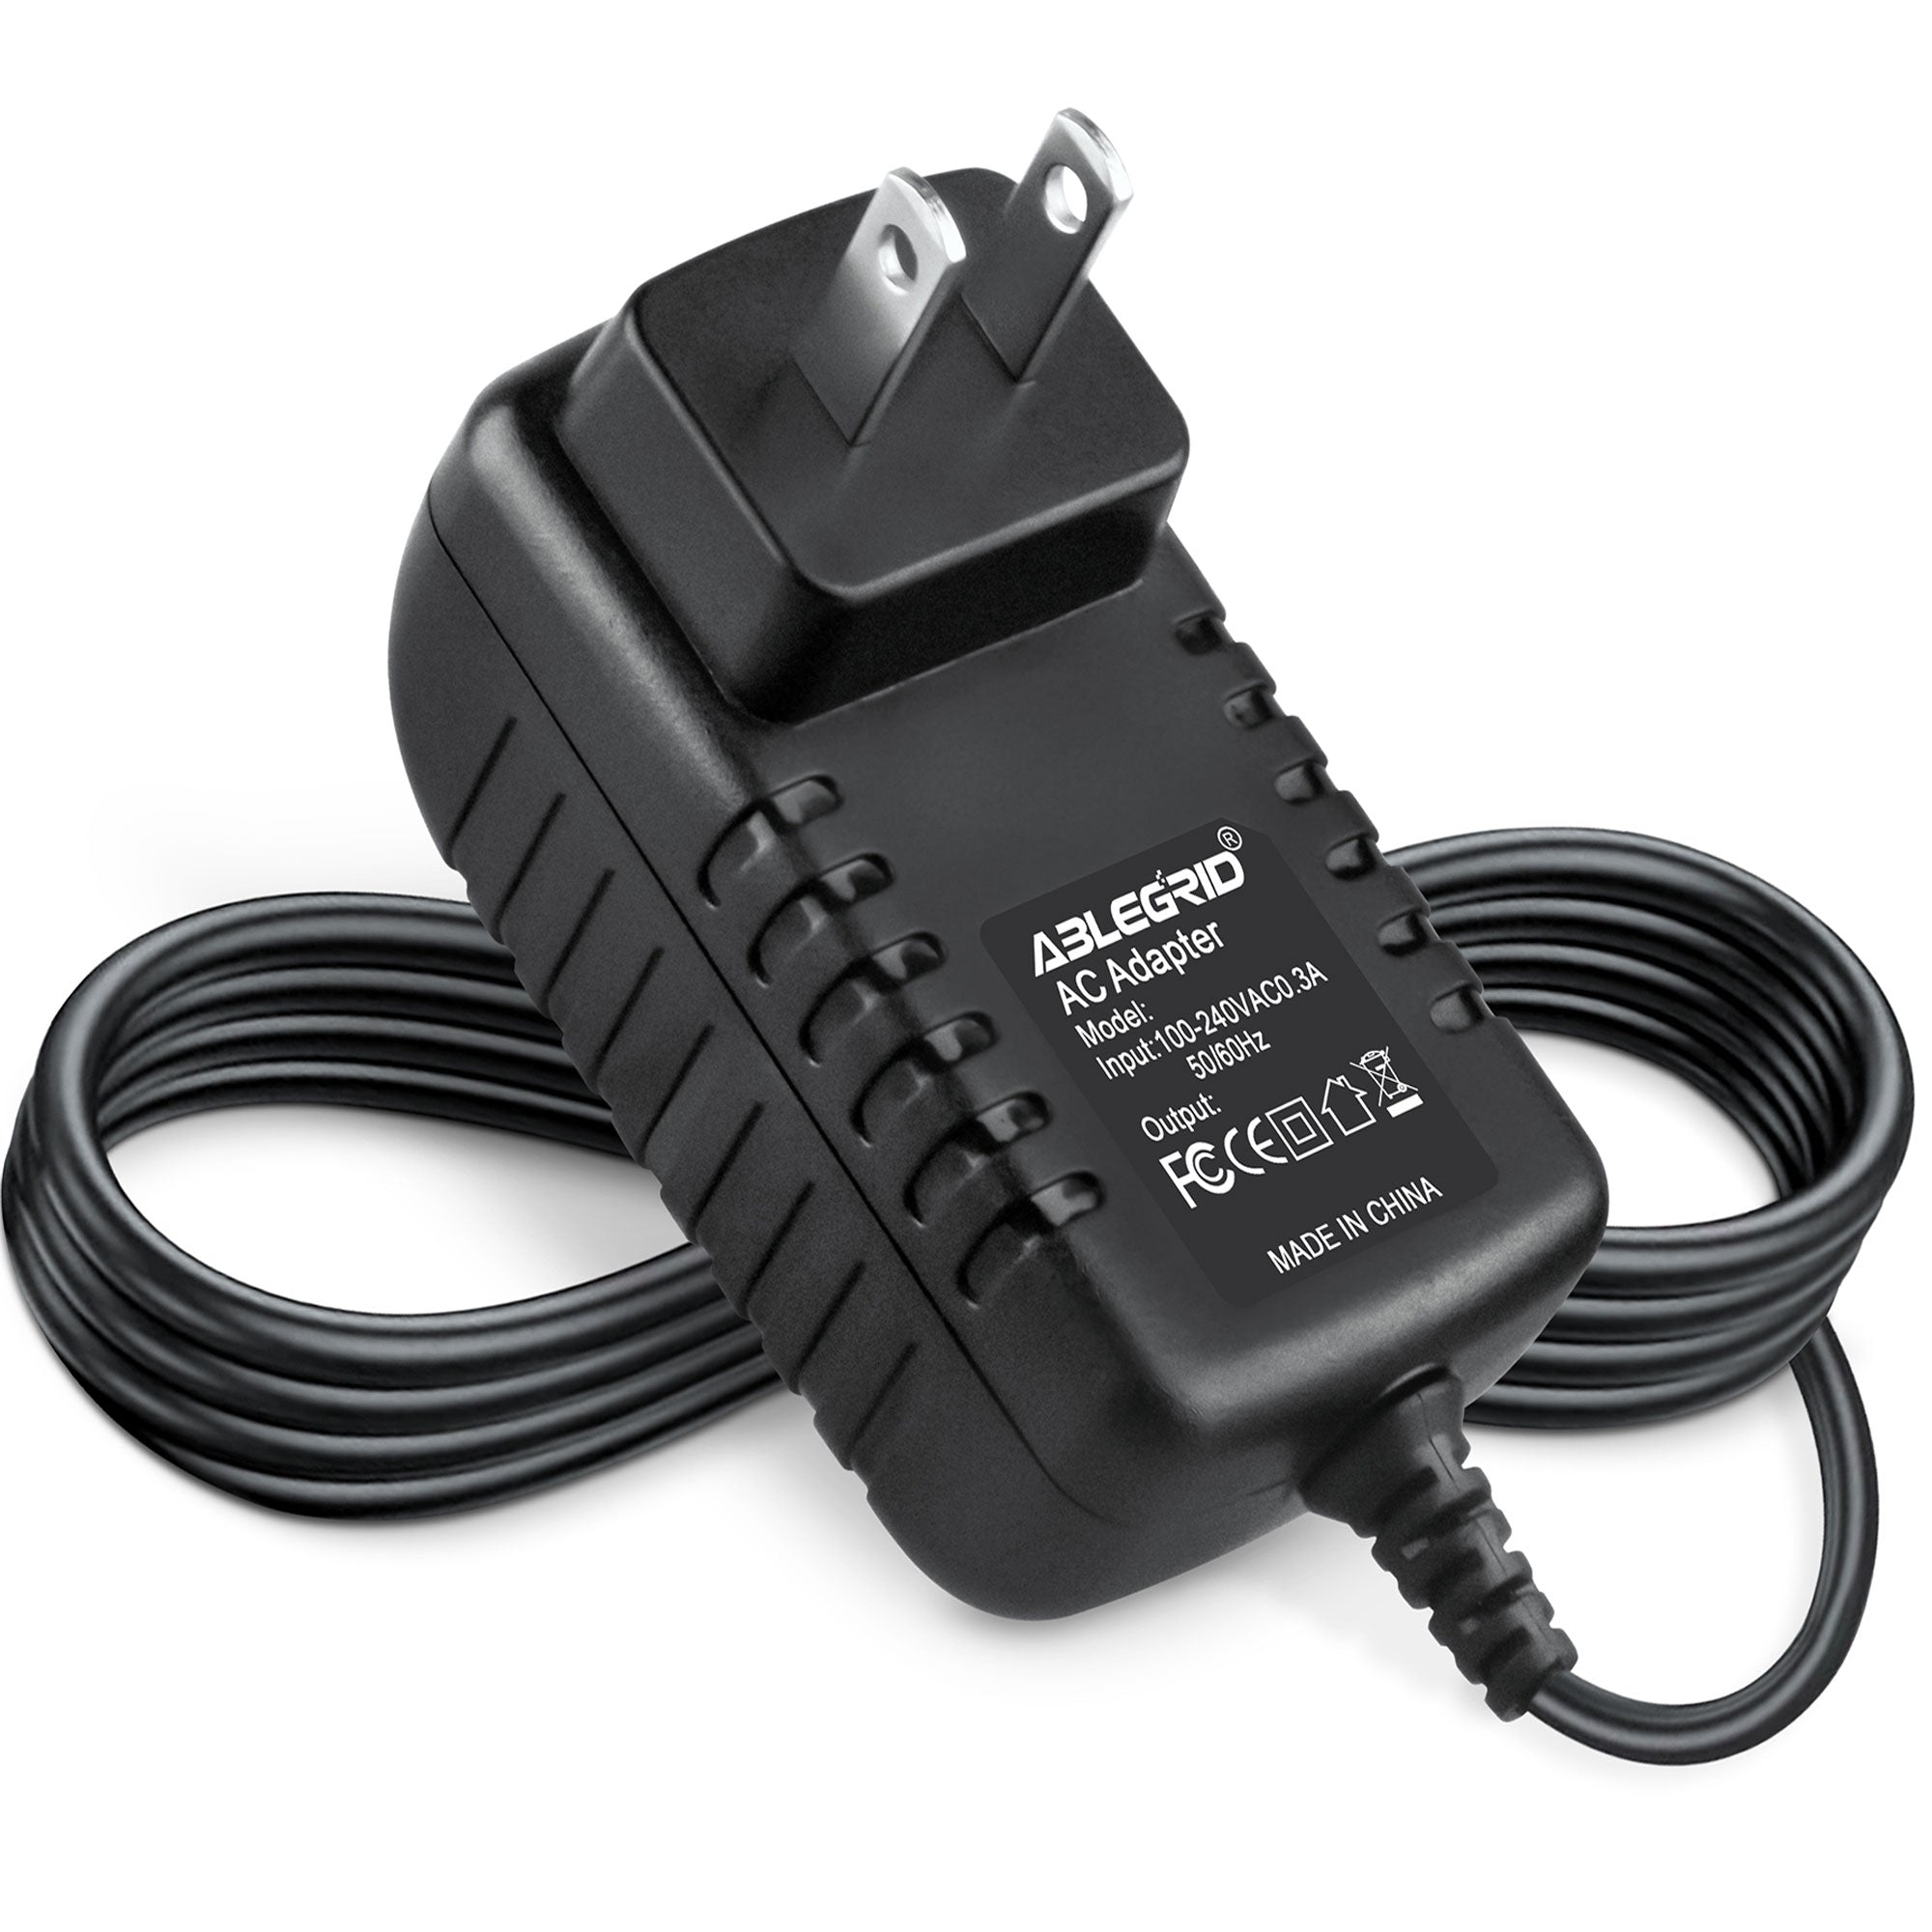 AbleGrid AC / DC Adapter for Model LA-520 LA-520W Tablet Power Supply Cord Cable PS Wall Home Charger Input: 100 - 240 VAC 50/60Hz Worldwide Voltage Use Mains PSU (with Barrel Round Plug Tip. Please Check for Compatibility With Your Unit. Thanks.)